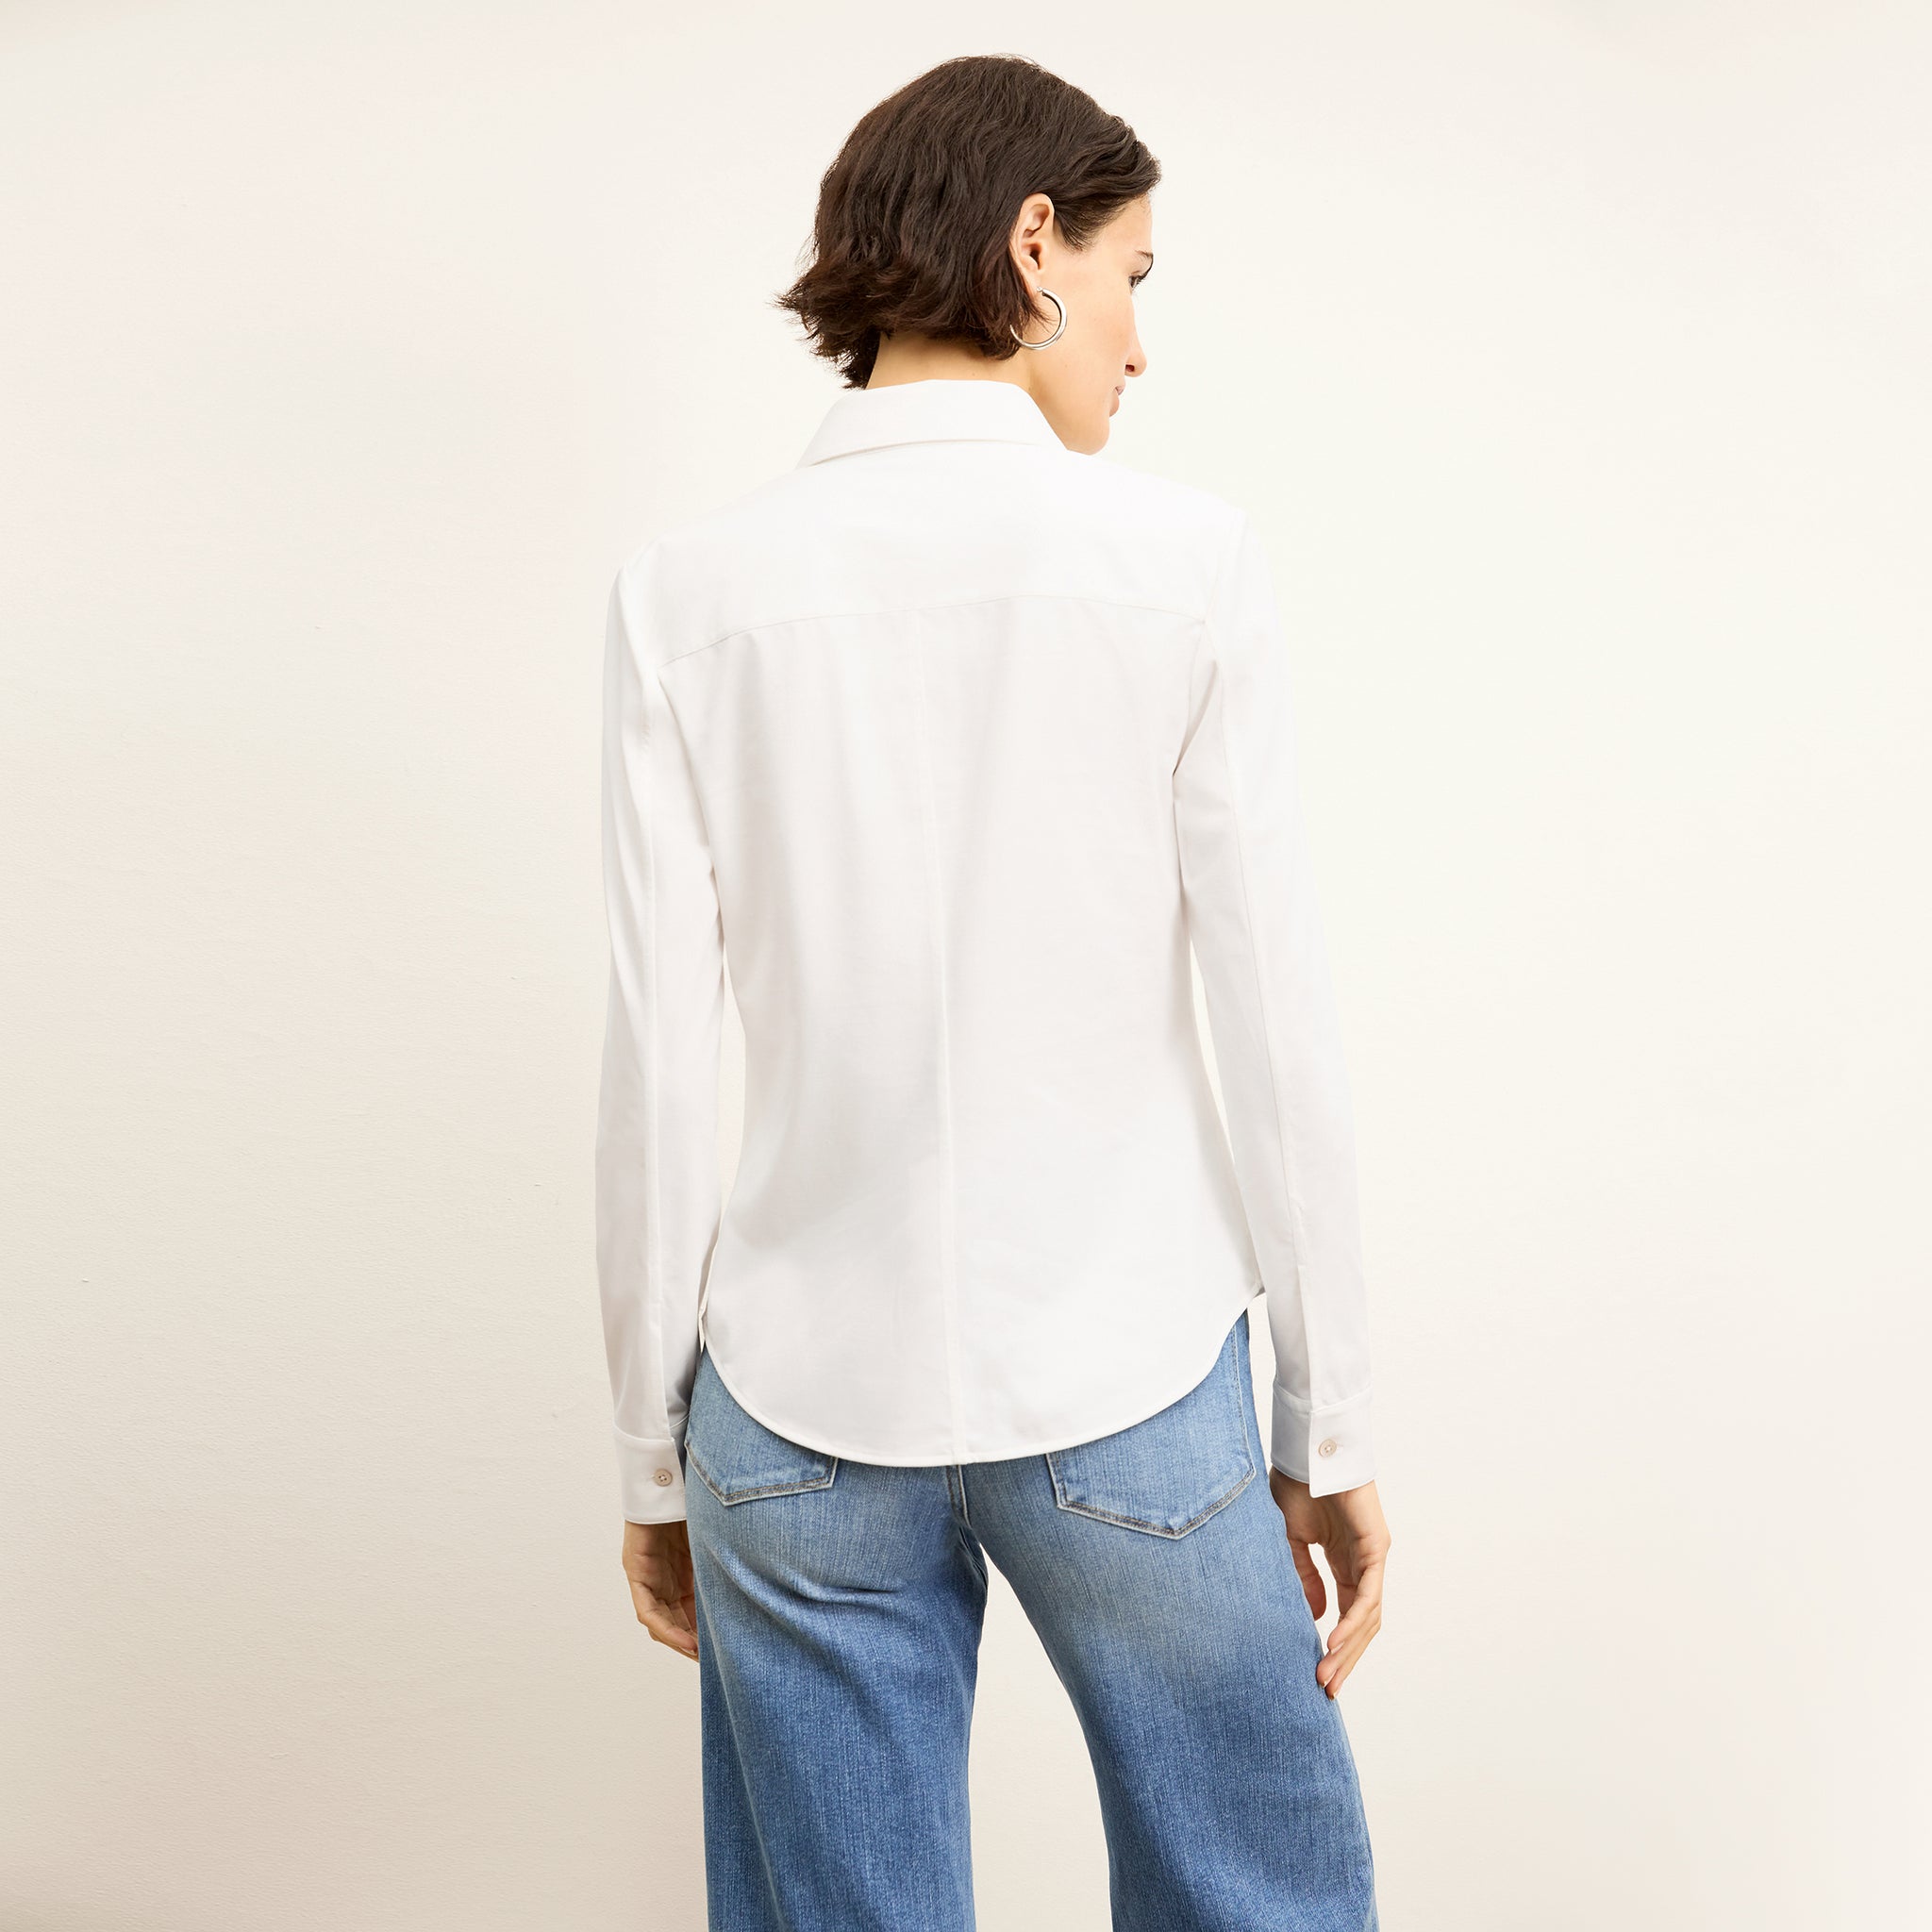 Back image of a woman wearing the Clemens